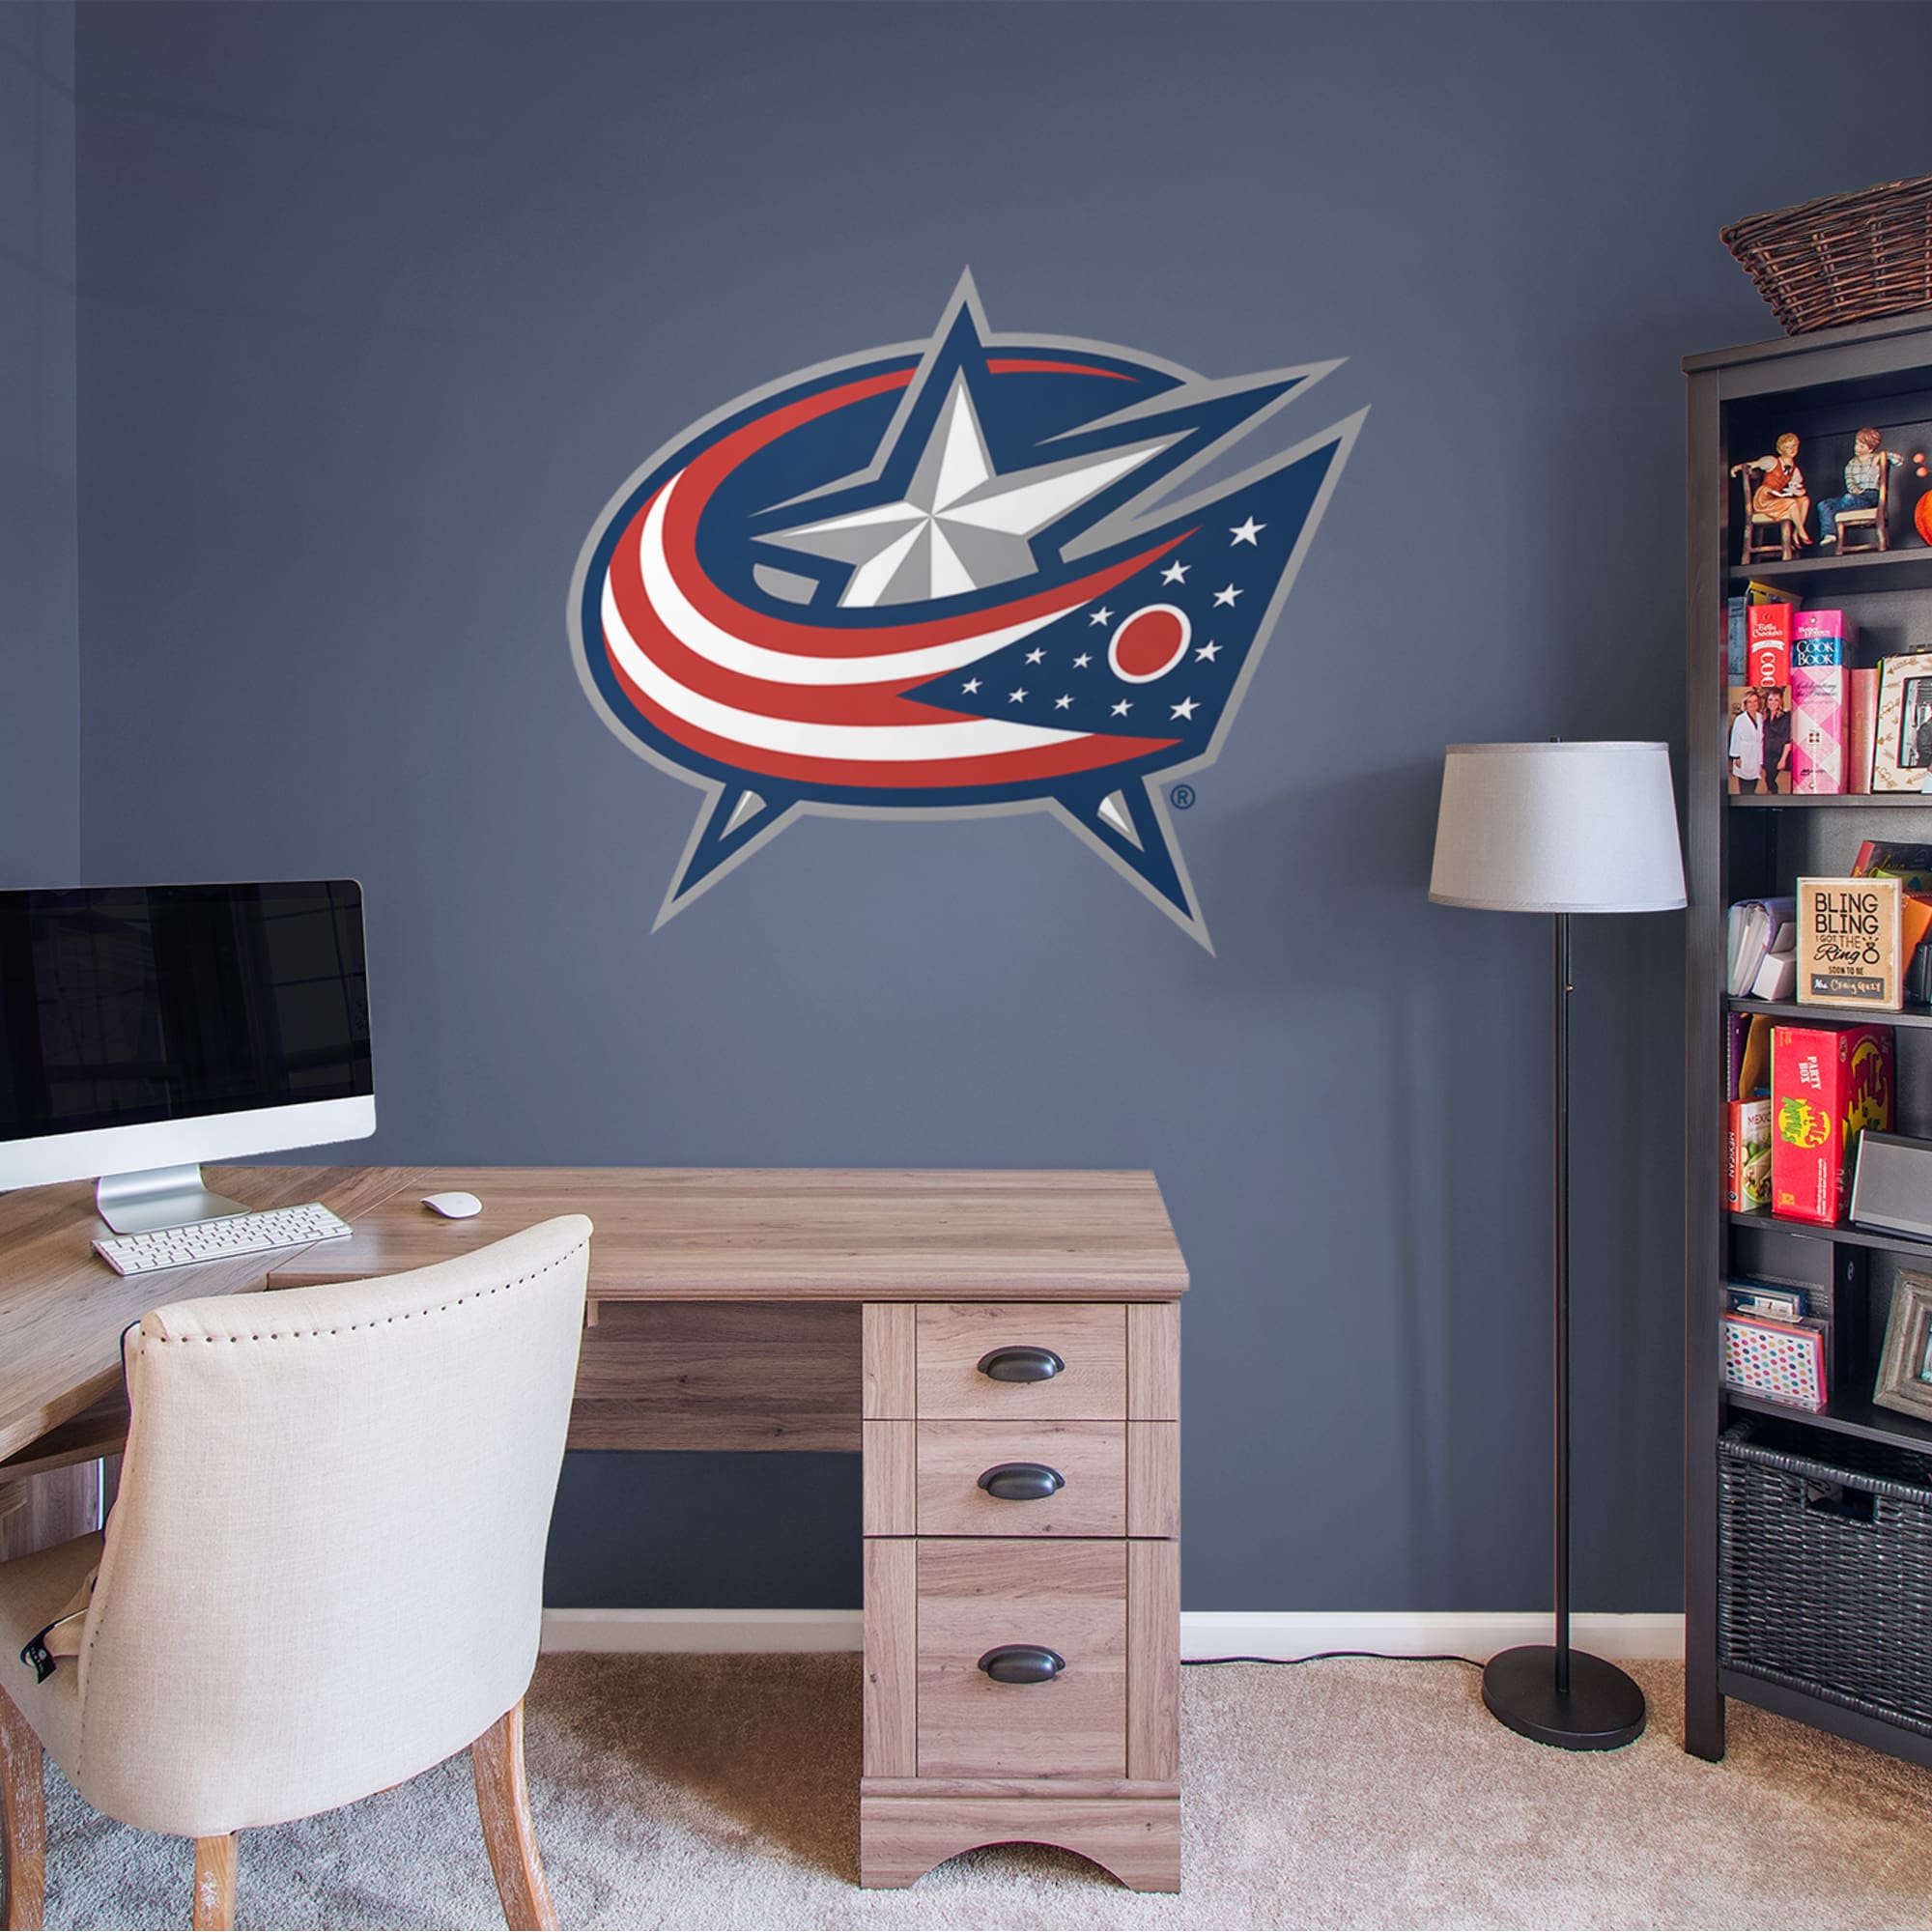 Columbus Blue Jackets: Logo - Officially Licensed NHL Removable Wall Decal Giant Logo (44"W x 38"H) by Fathead | Vinyl